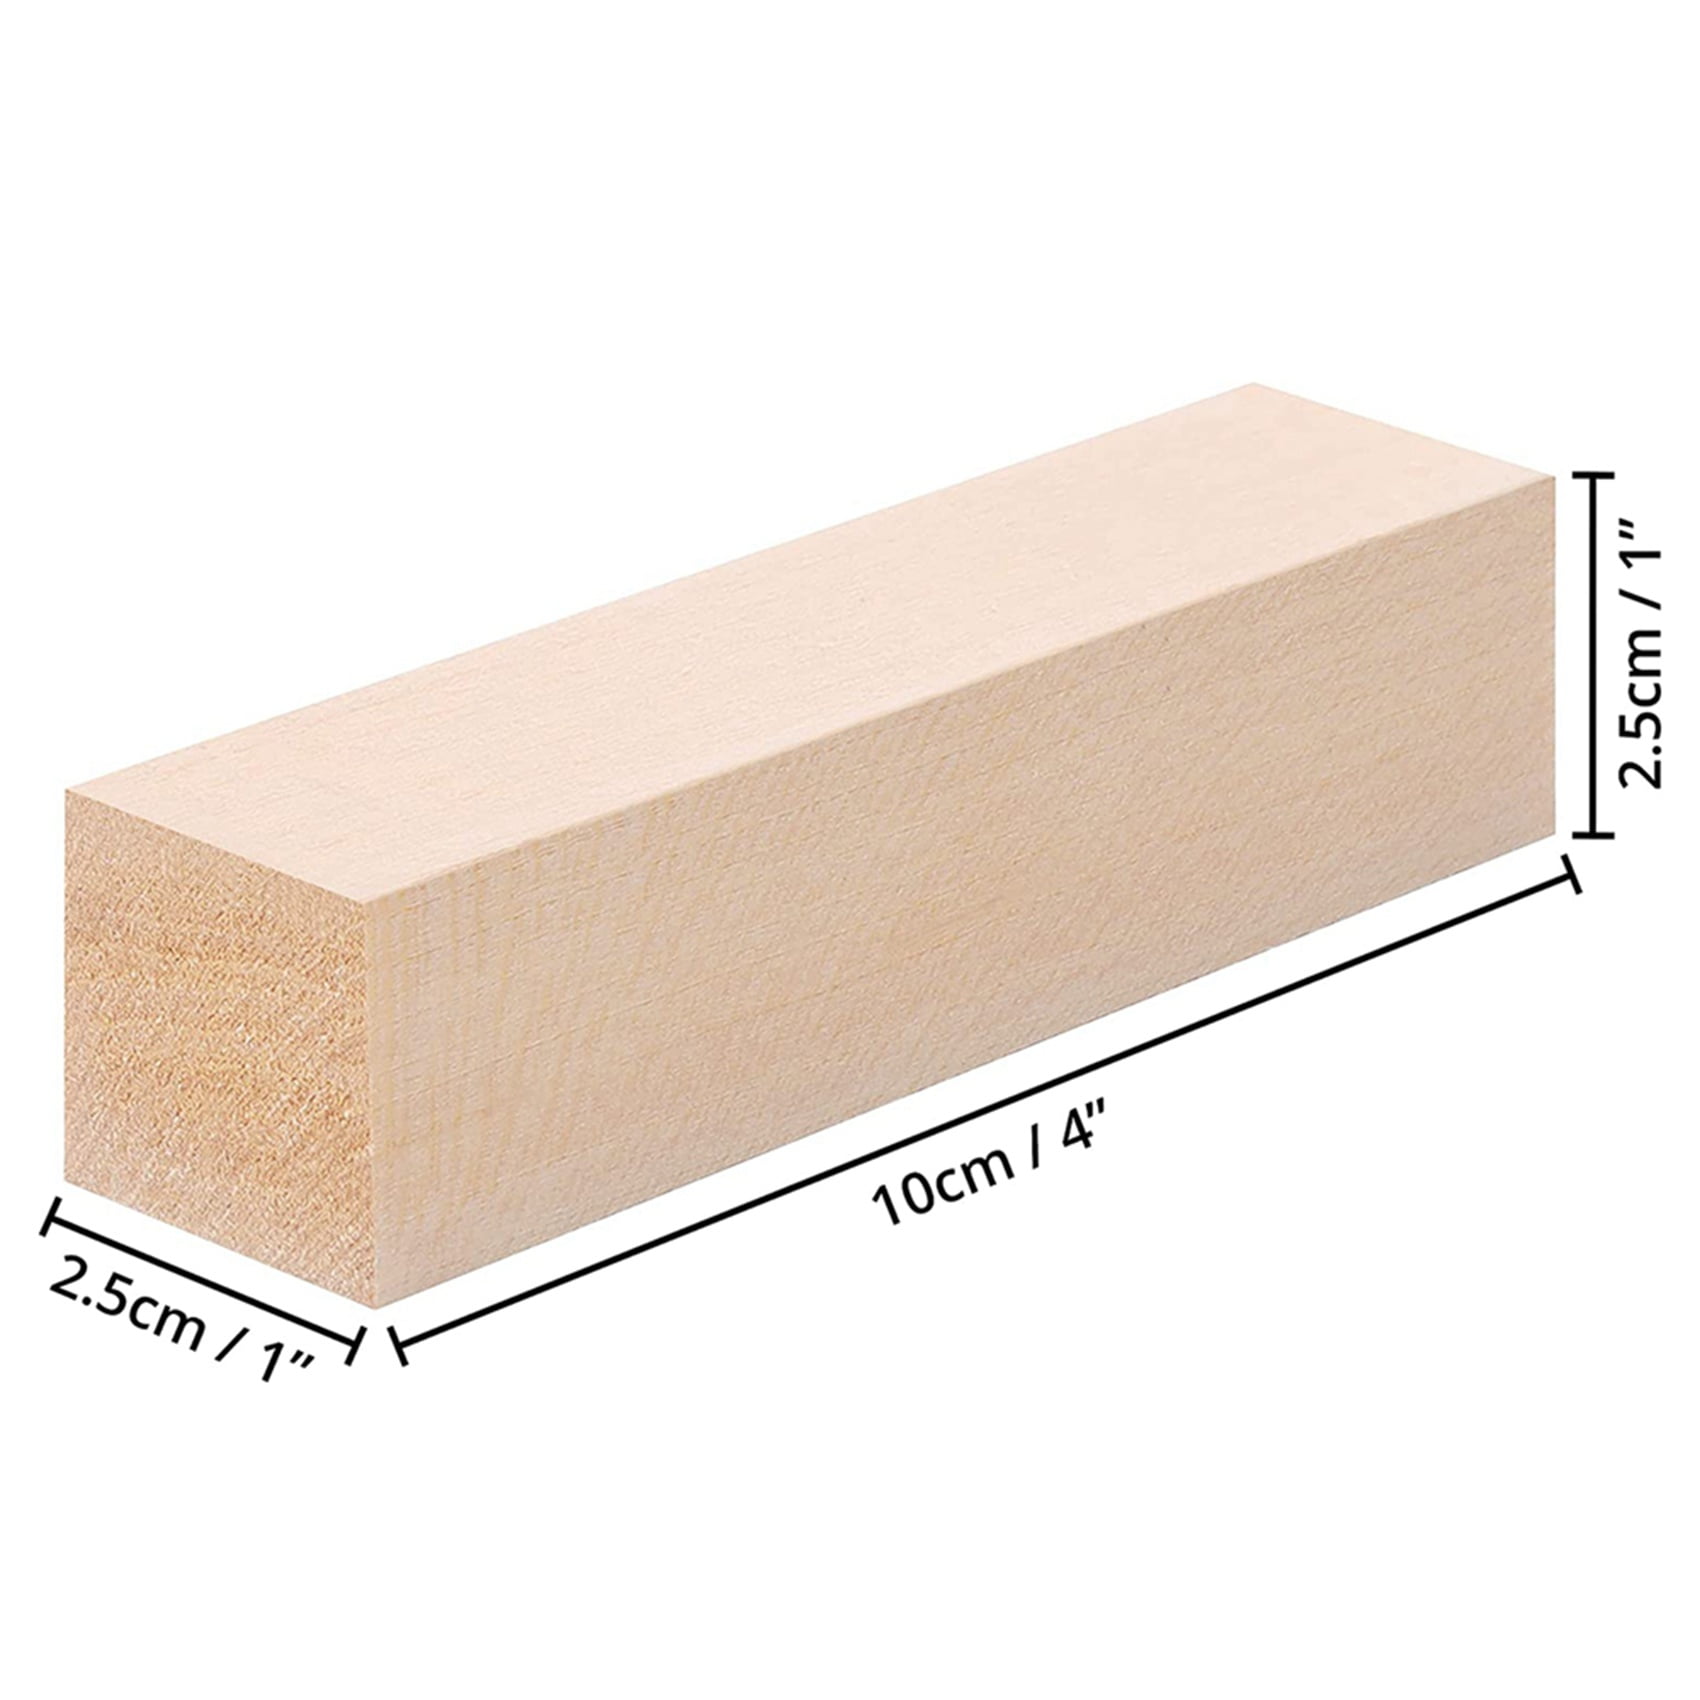  20PCS Basswood Carving Blocks, 4 Size Unfinished Wood Carving  Blocks Rectangle Wood Block Kit for Wood Carving Beginners and  Professionals(1”x1”x2” /1”x1”x4” /2”x2”x4” /2”x2”x1”)